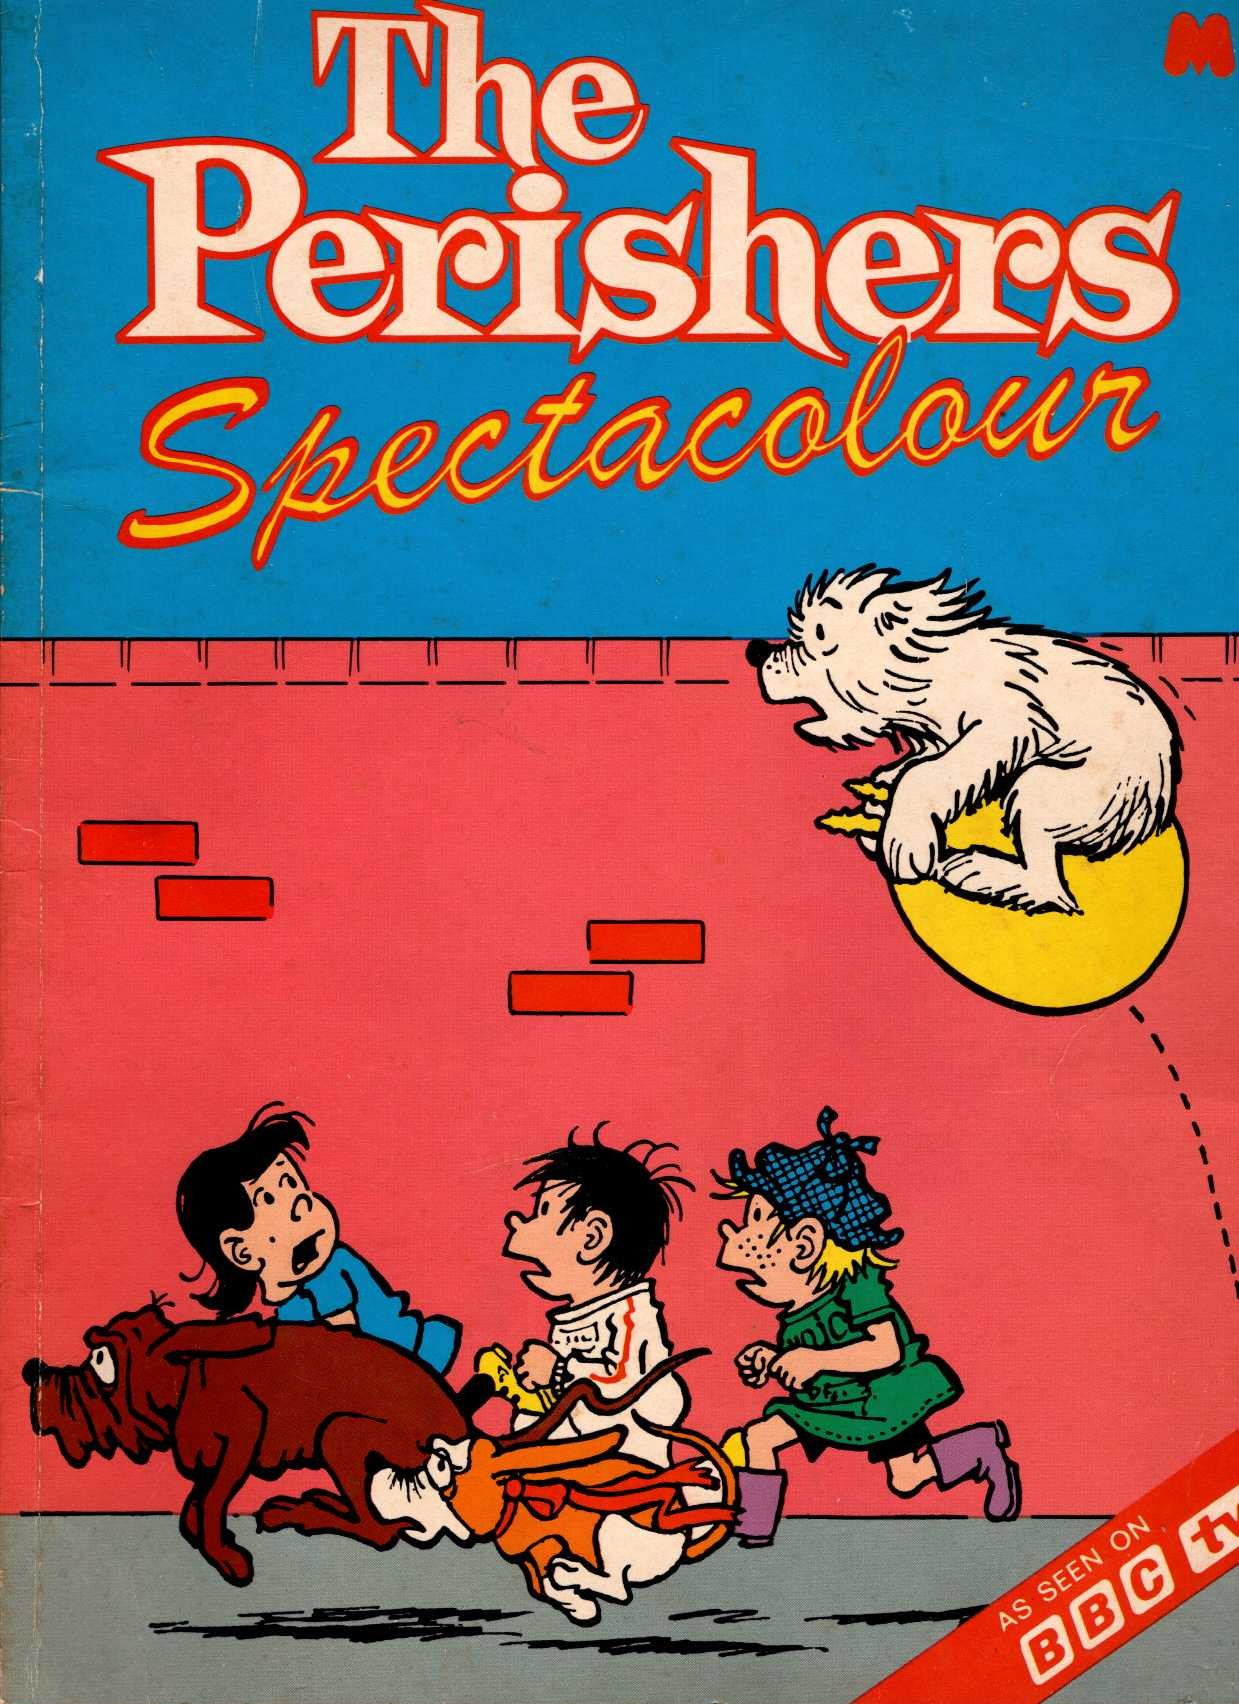 Maurice Dodd  THE PERISHERS SPECTACOLOUR front book cover image